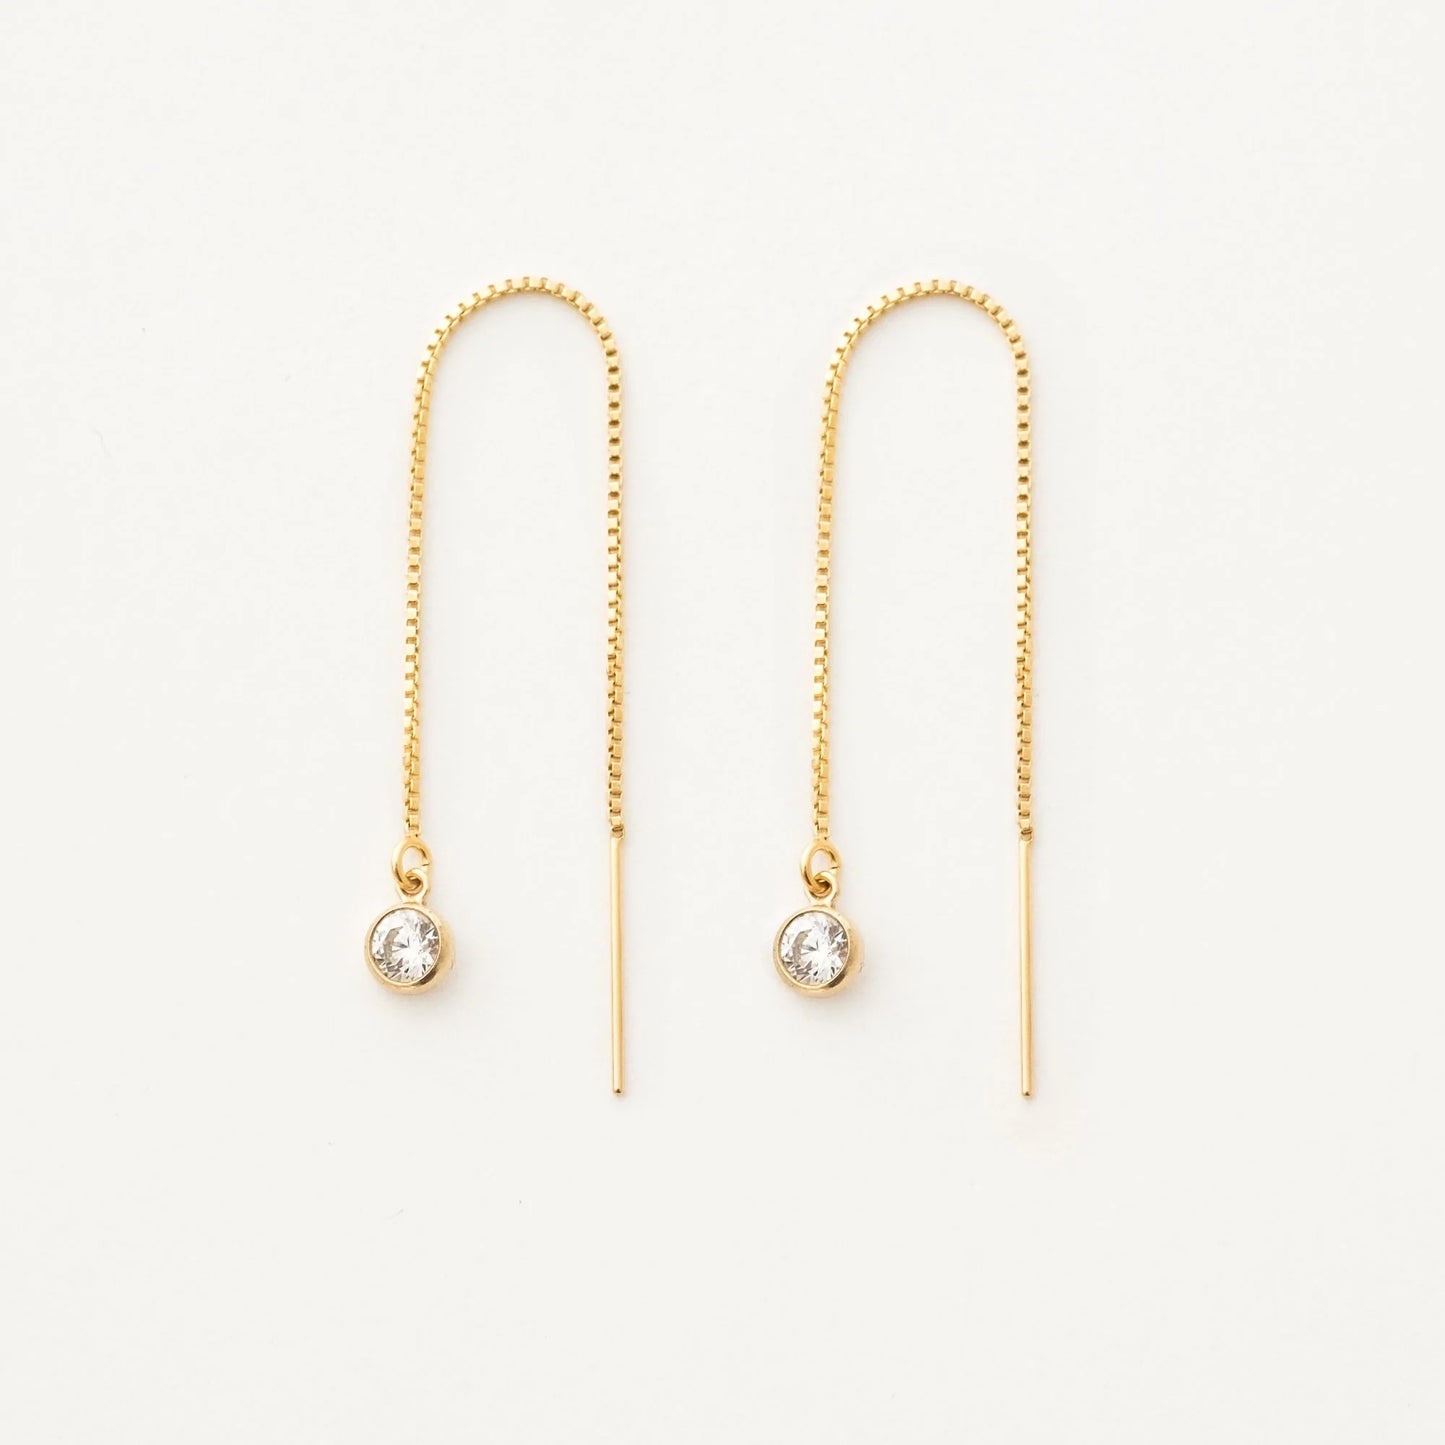 Tiny Solitaire Threader Earrings